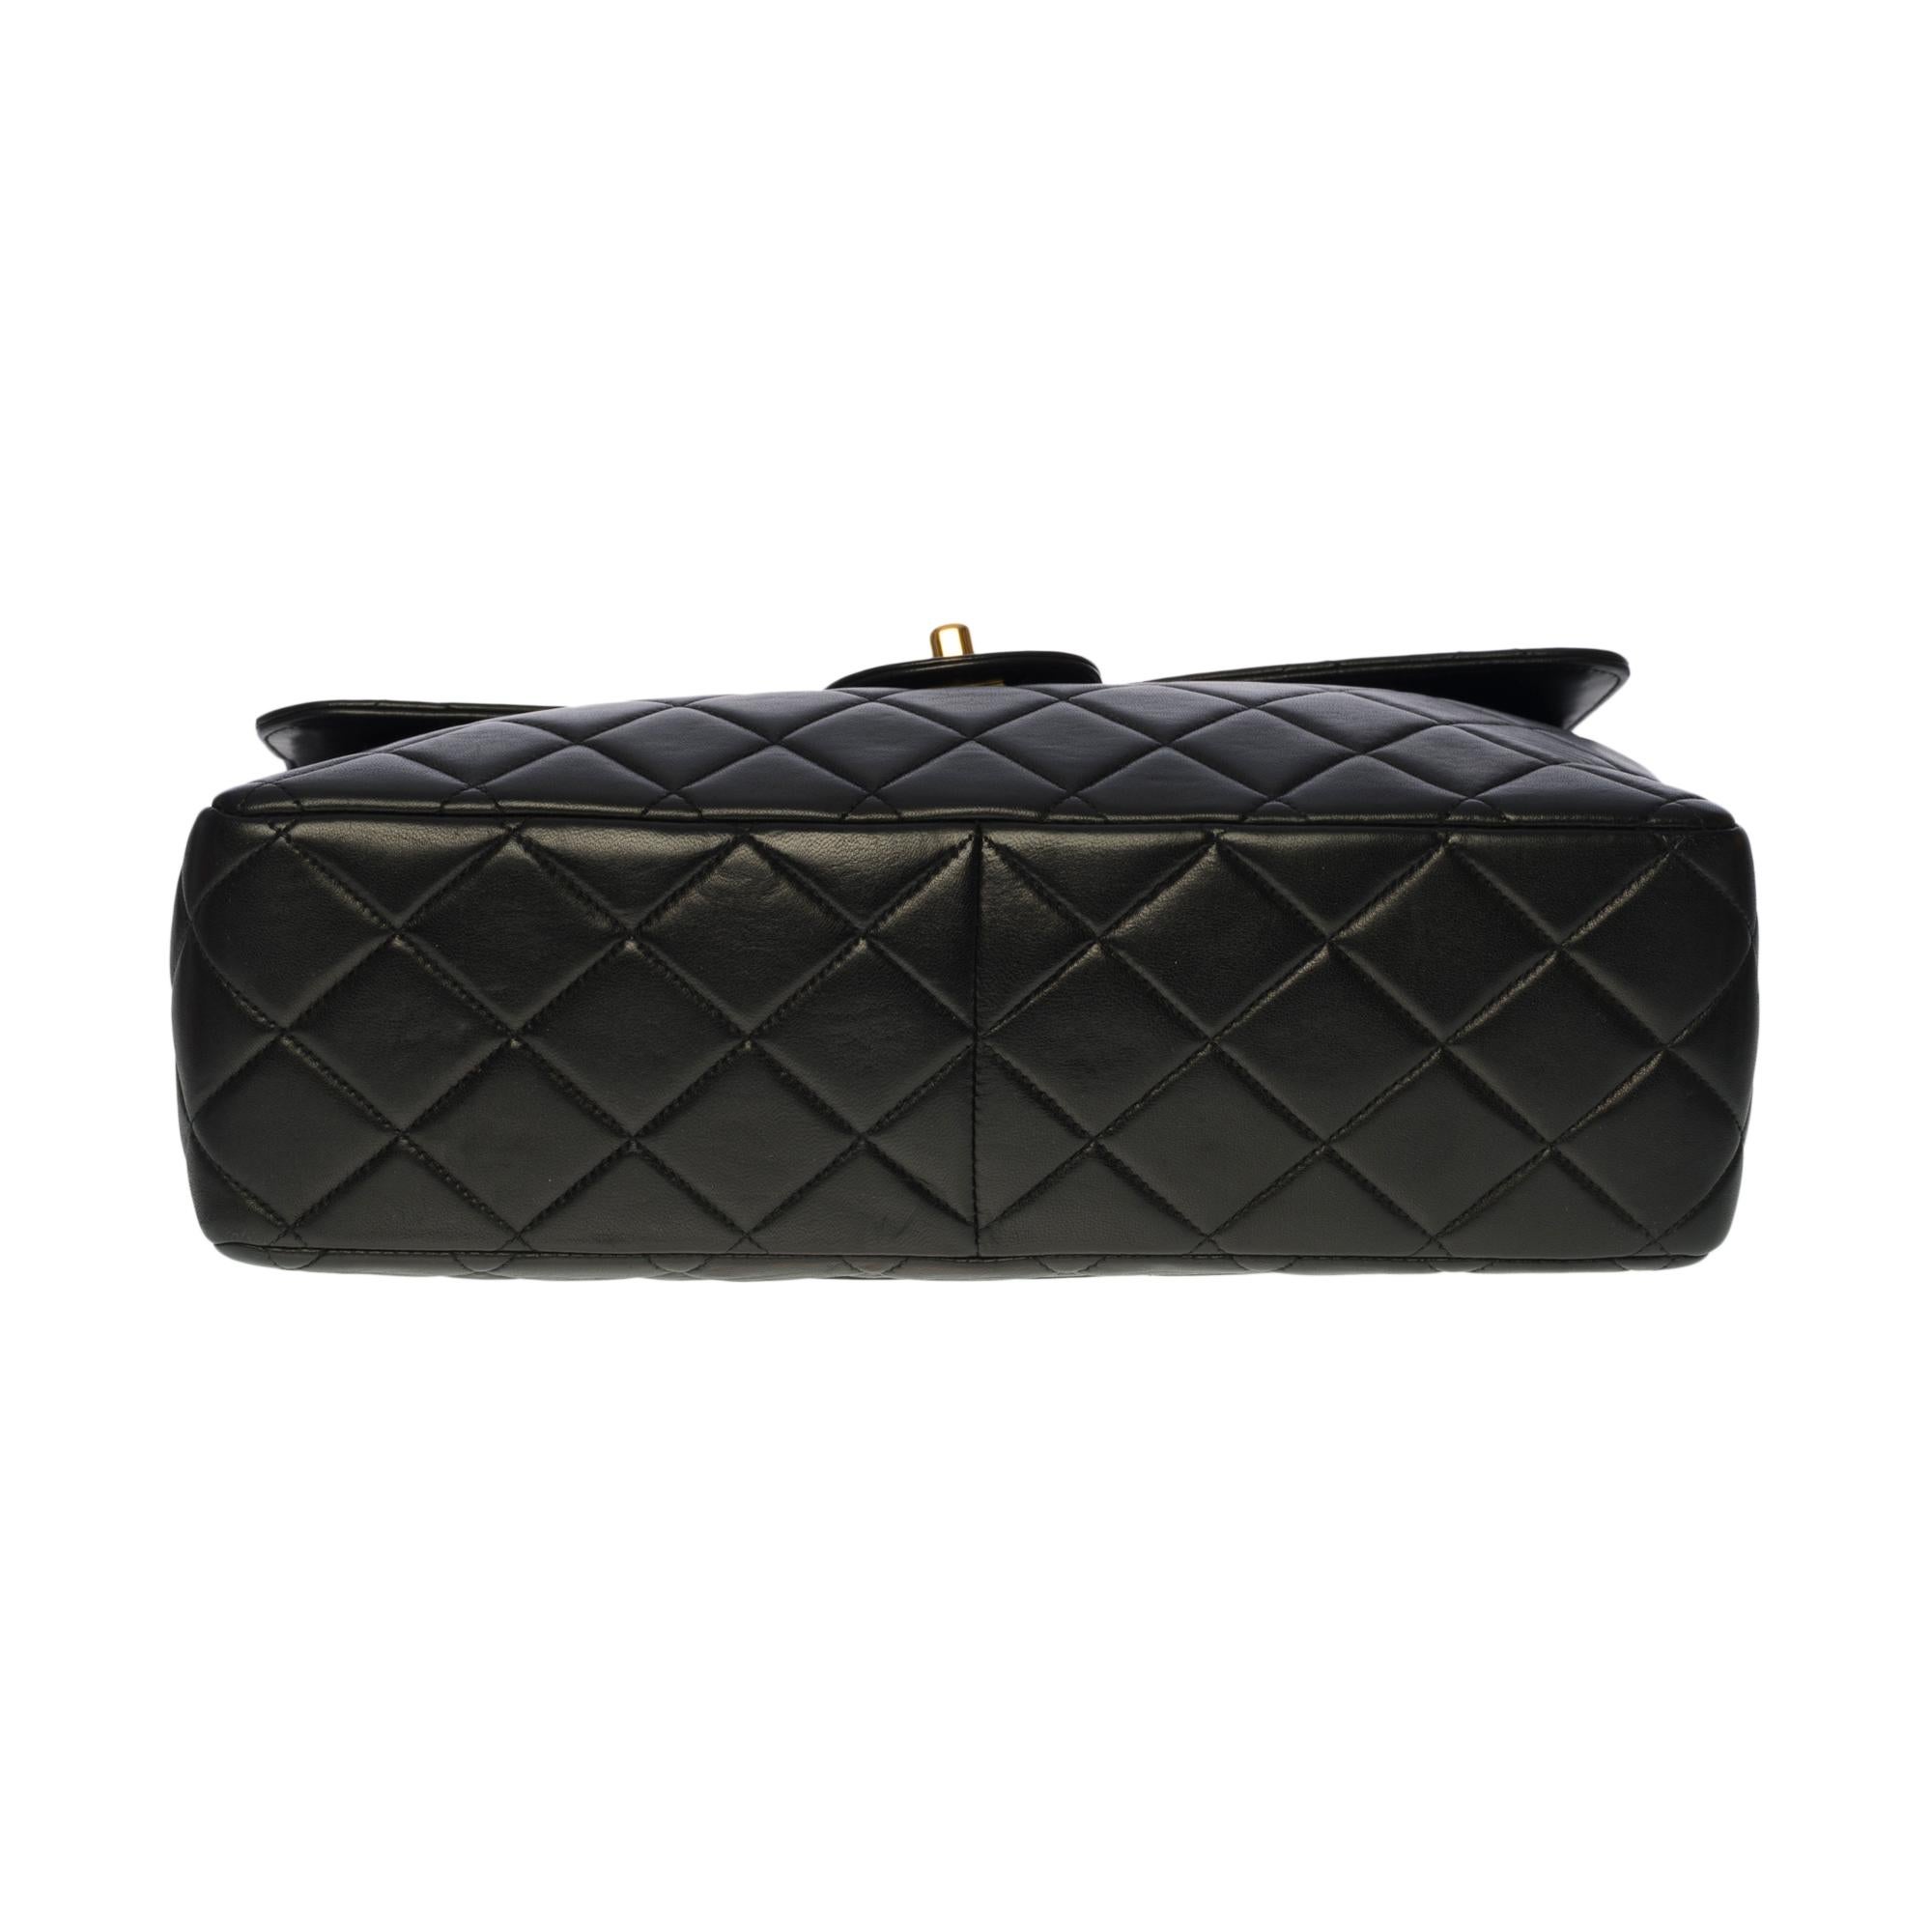 Chanel Timeless Jumbo single shoulder flap bag in black quilted lambskin, GHW For Sale 4